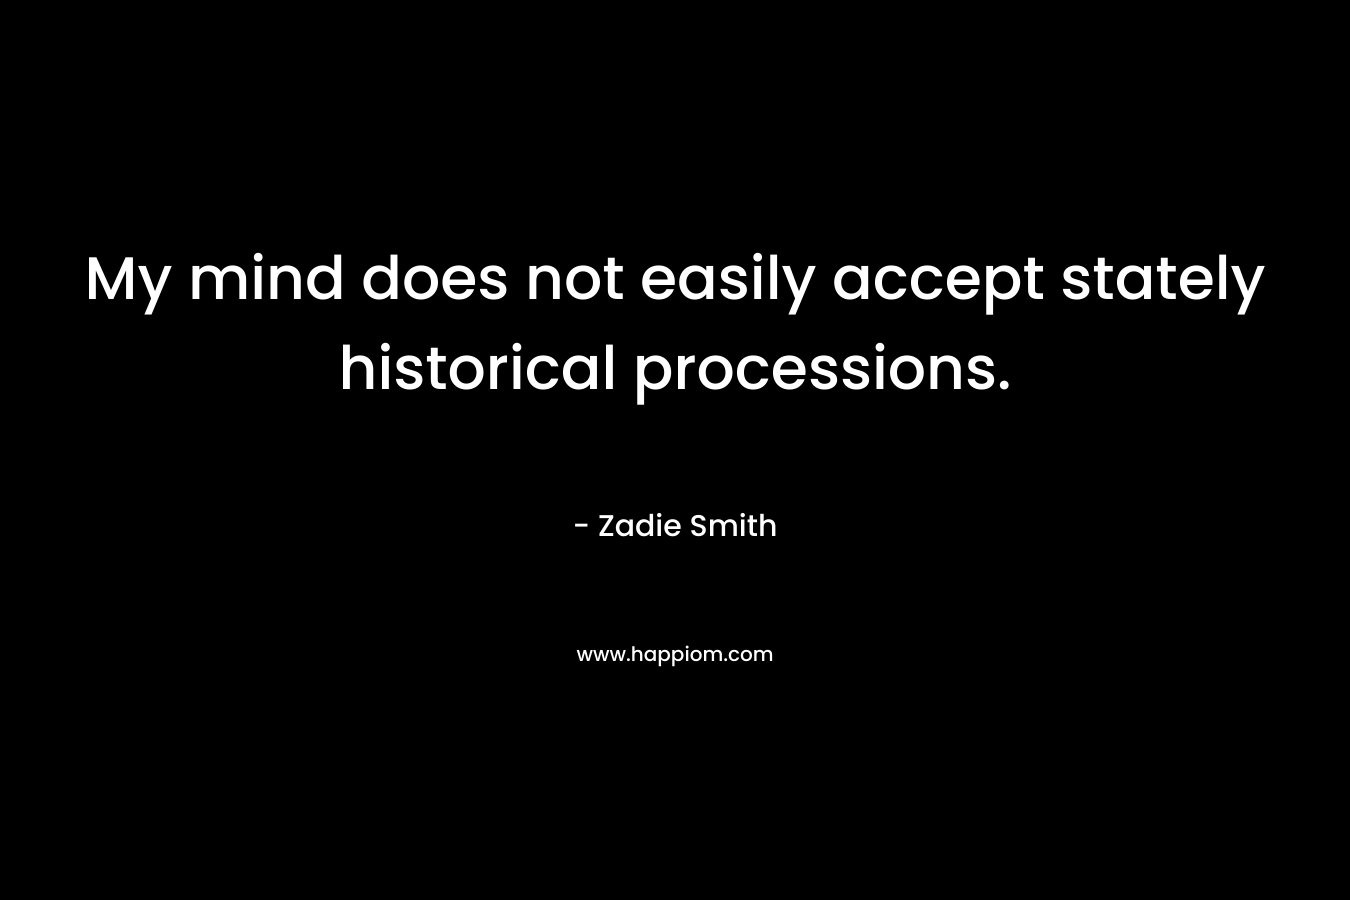 My mind does not easily accept stately historical processions. – Zadie Smith